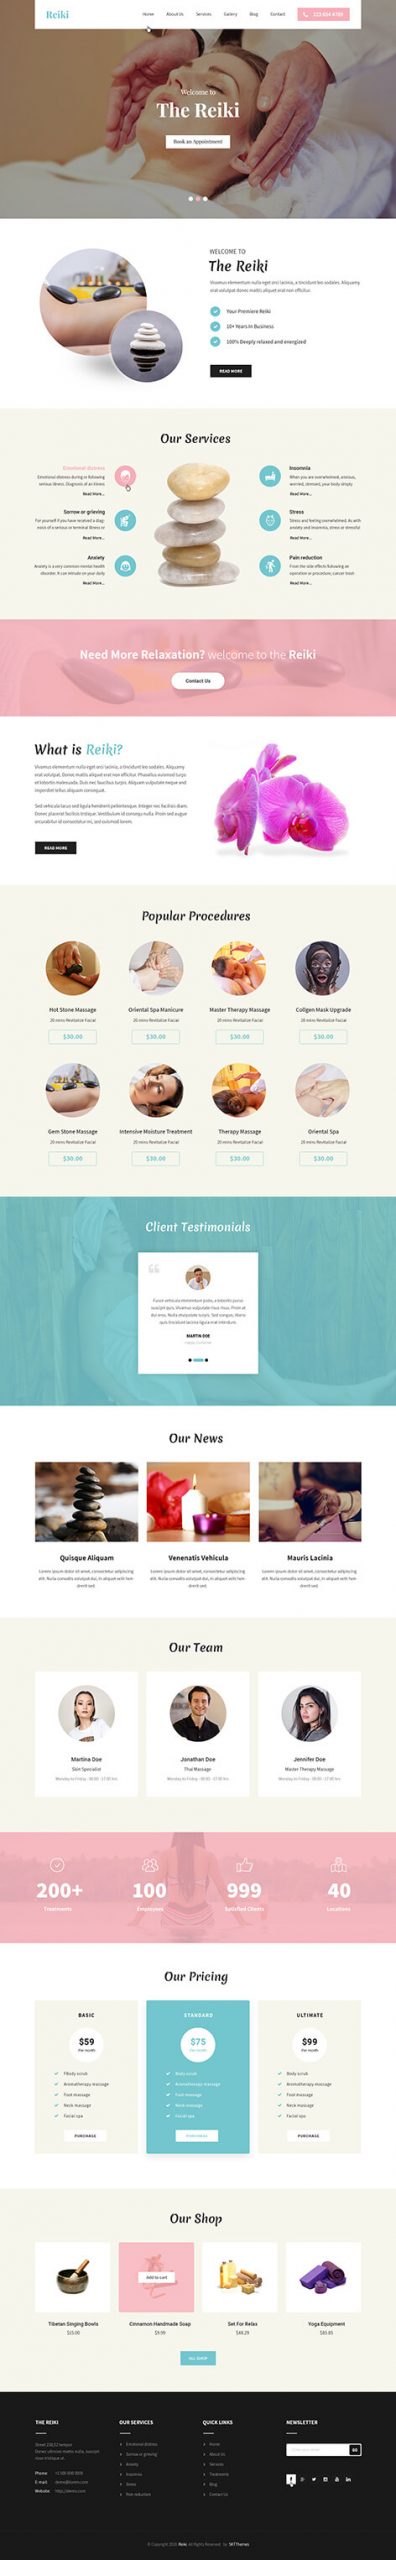 physical therapy wordPress theme1 scaled